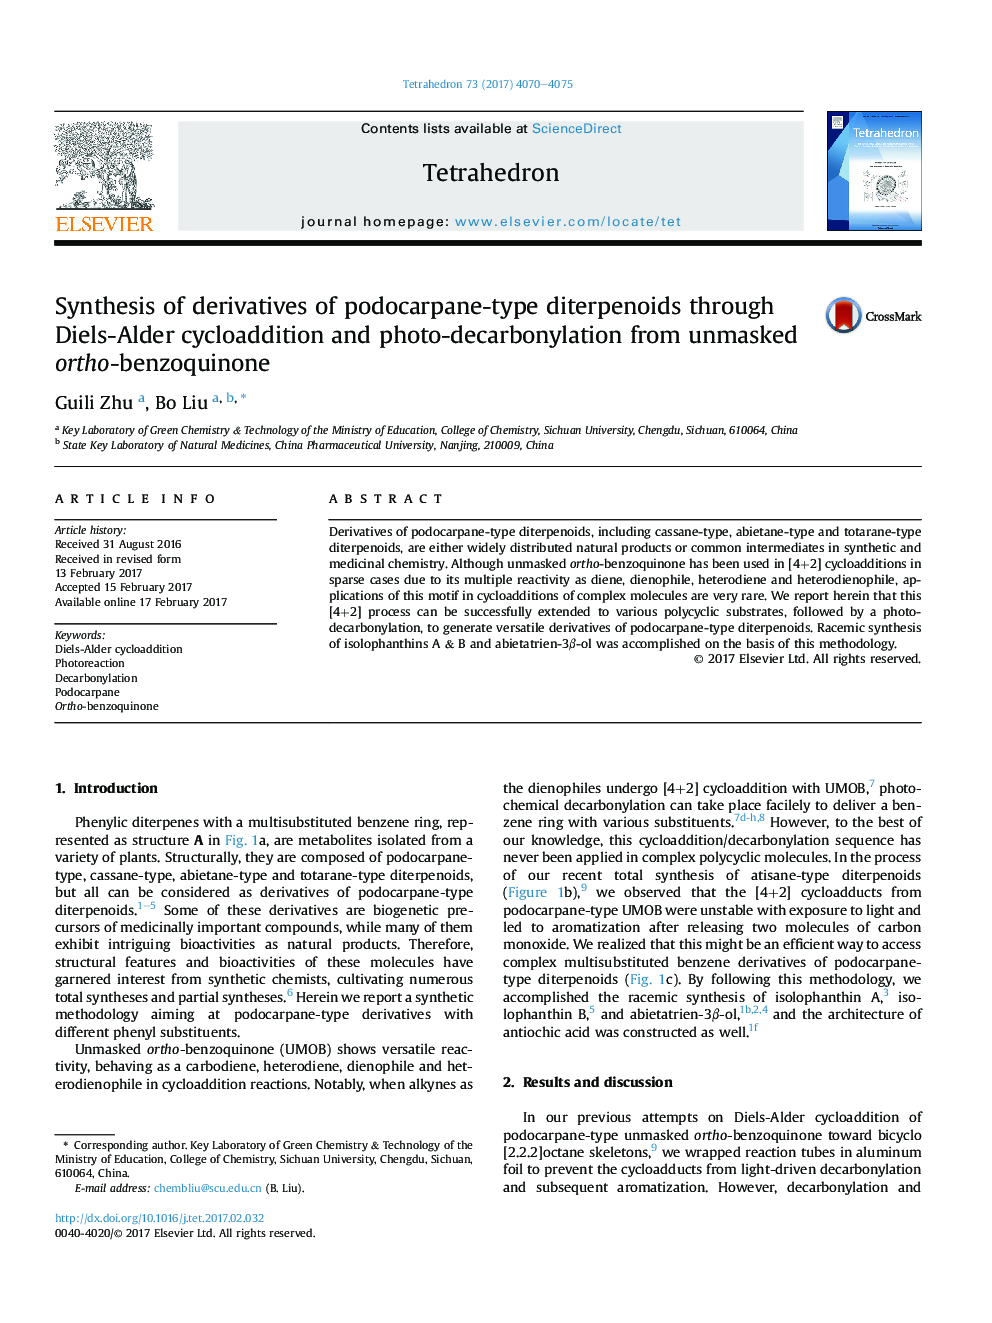 Synthesis of derivatives of podocarpane-type diterpenoids through Diels-Alder cycloaddition and photo-decarbonylation from unmasked ortho-benzoquinone